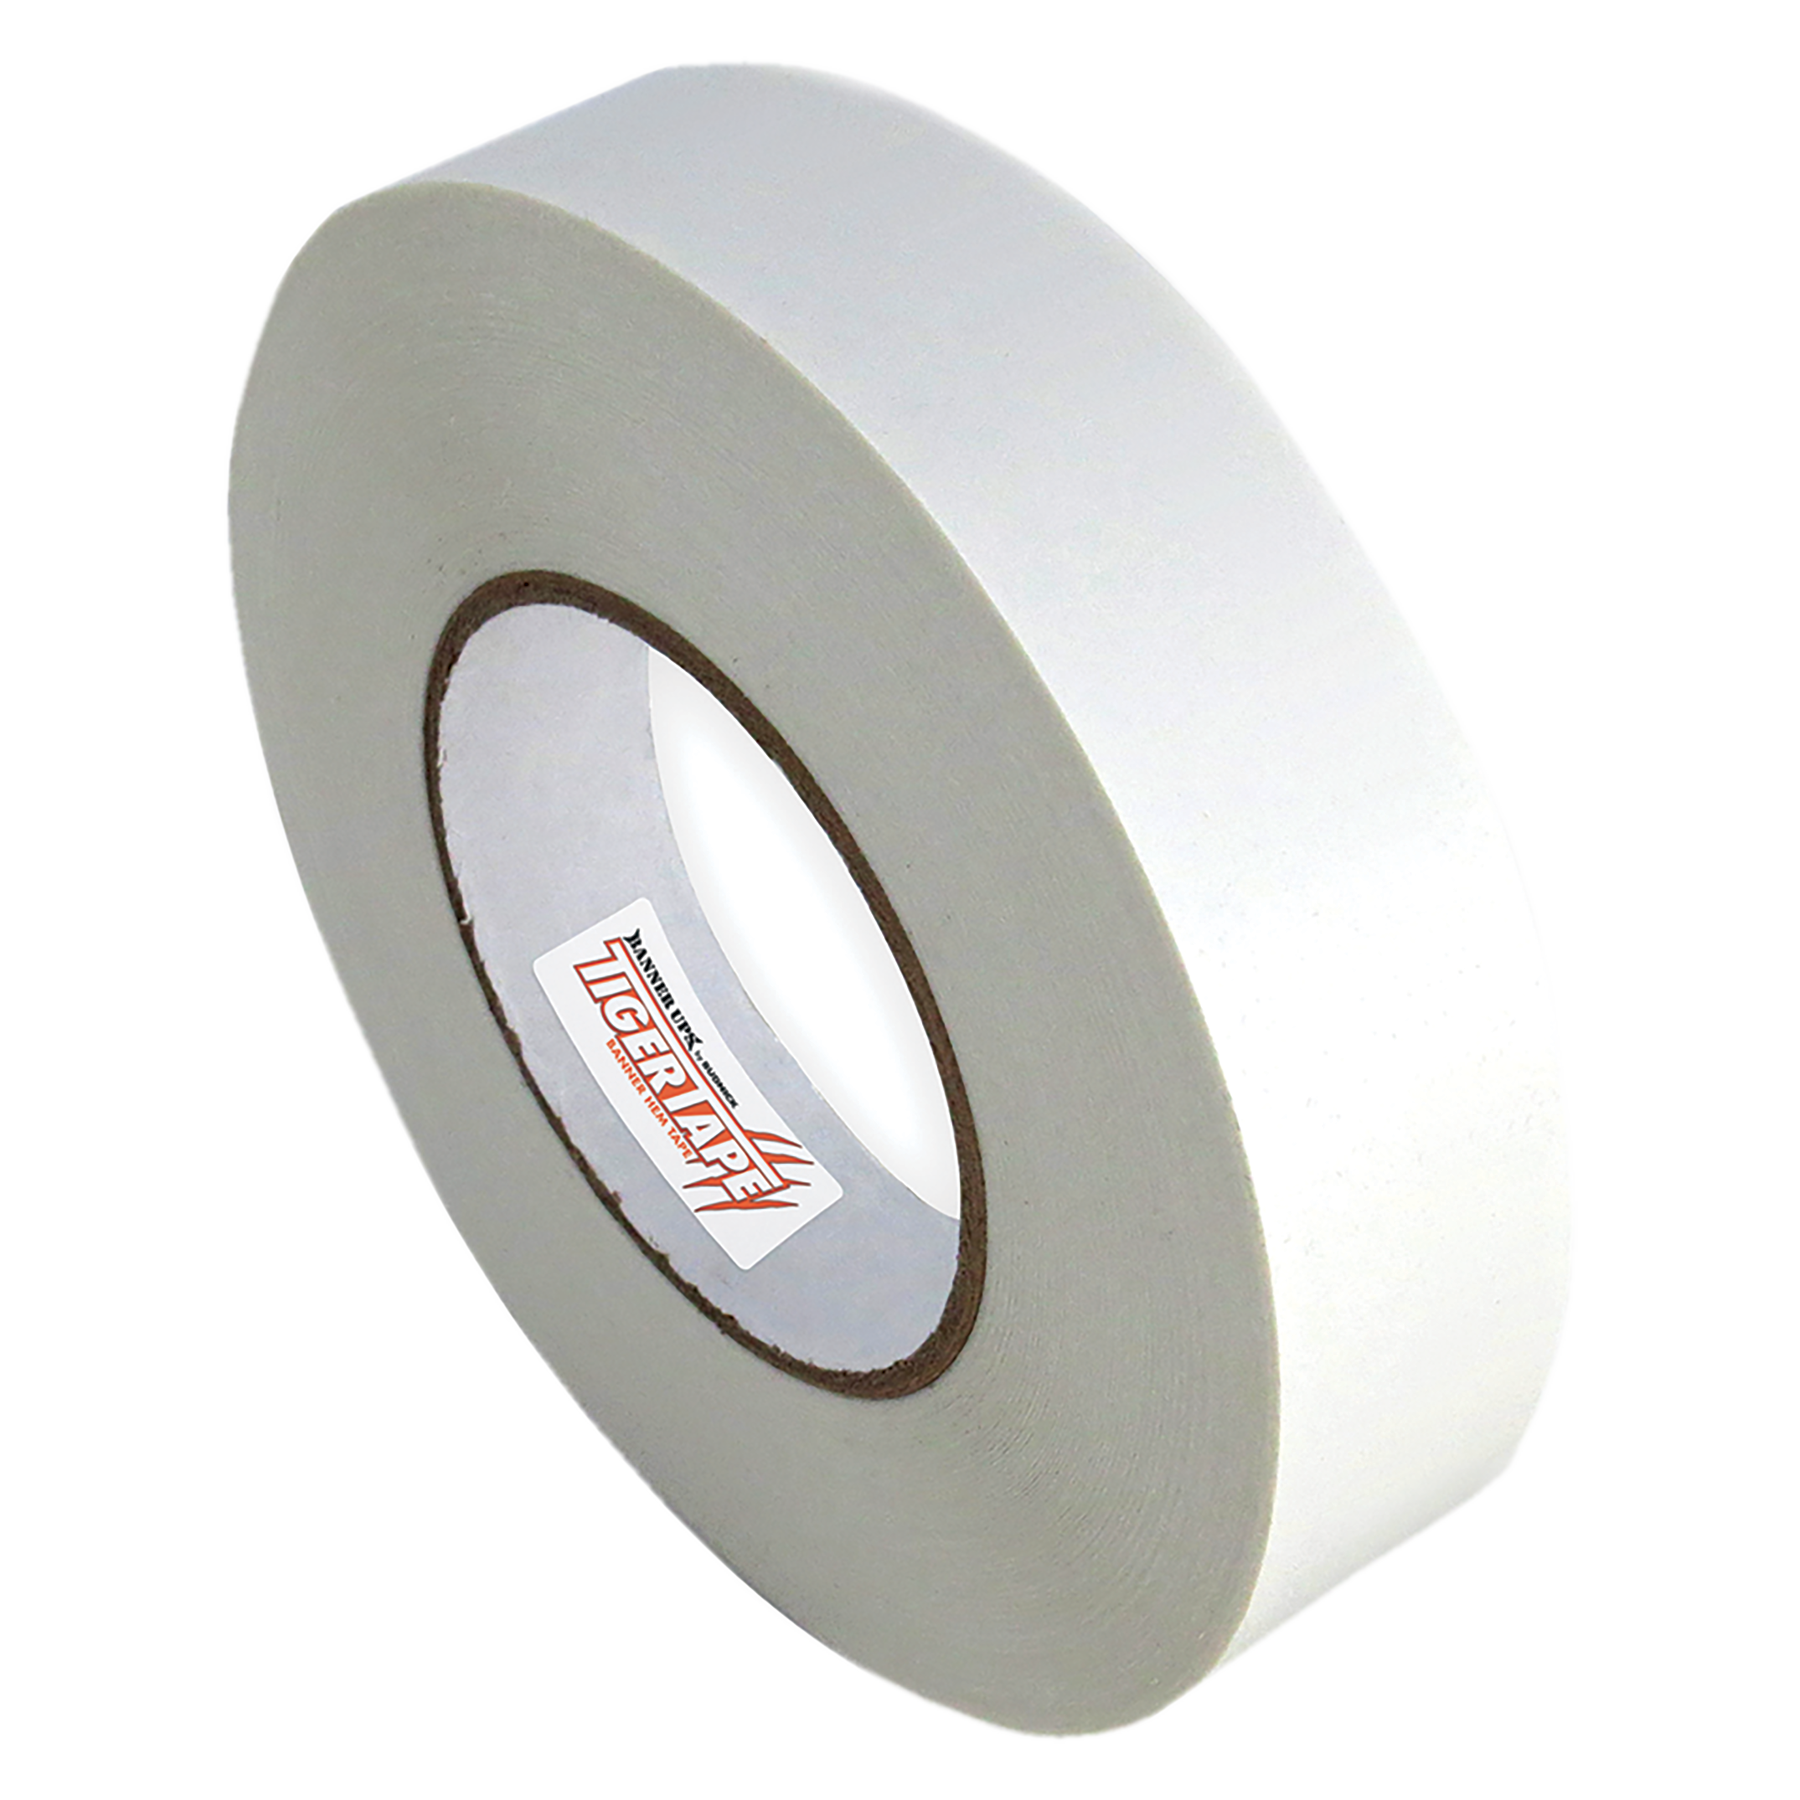 Hem Tape Double-Sided Banner Tape from